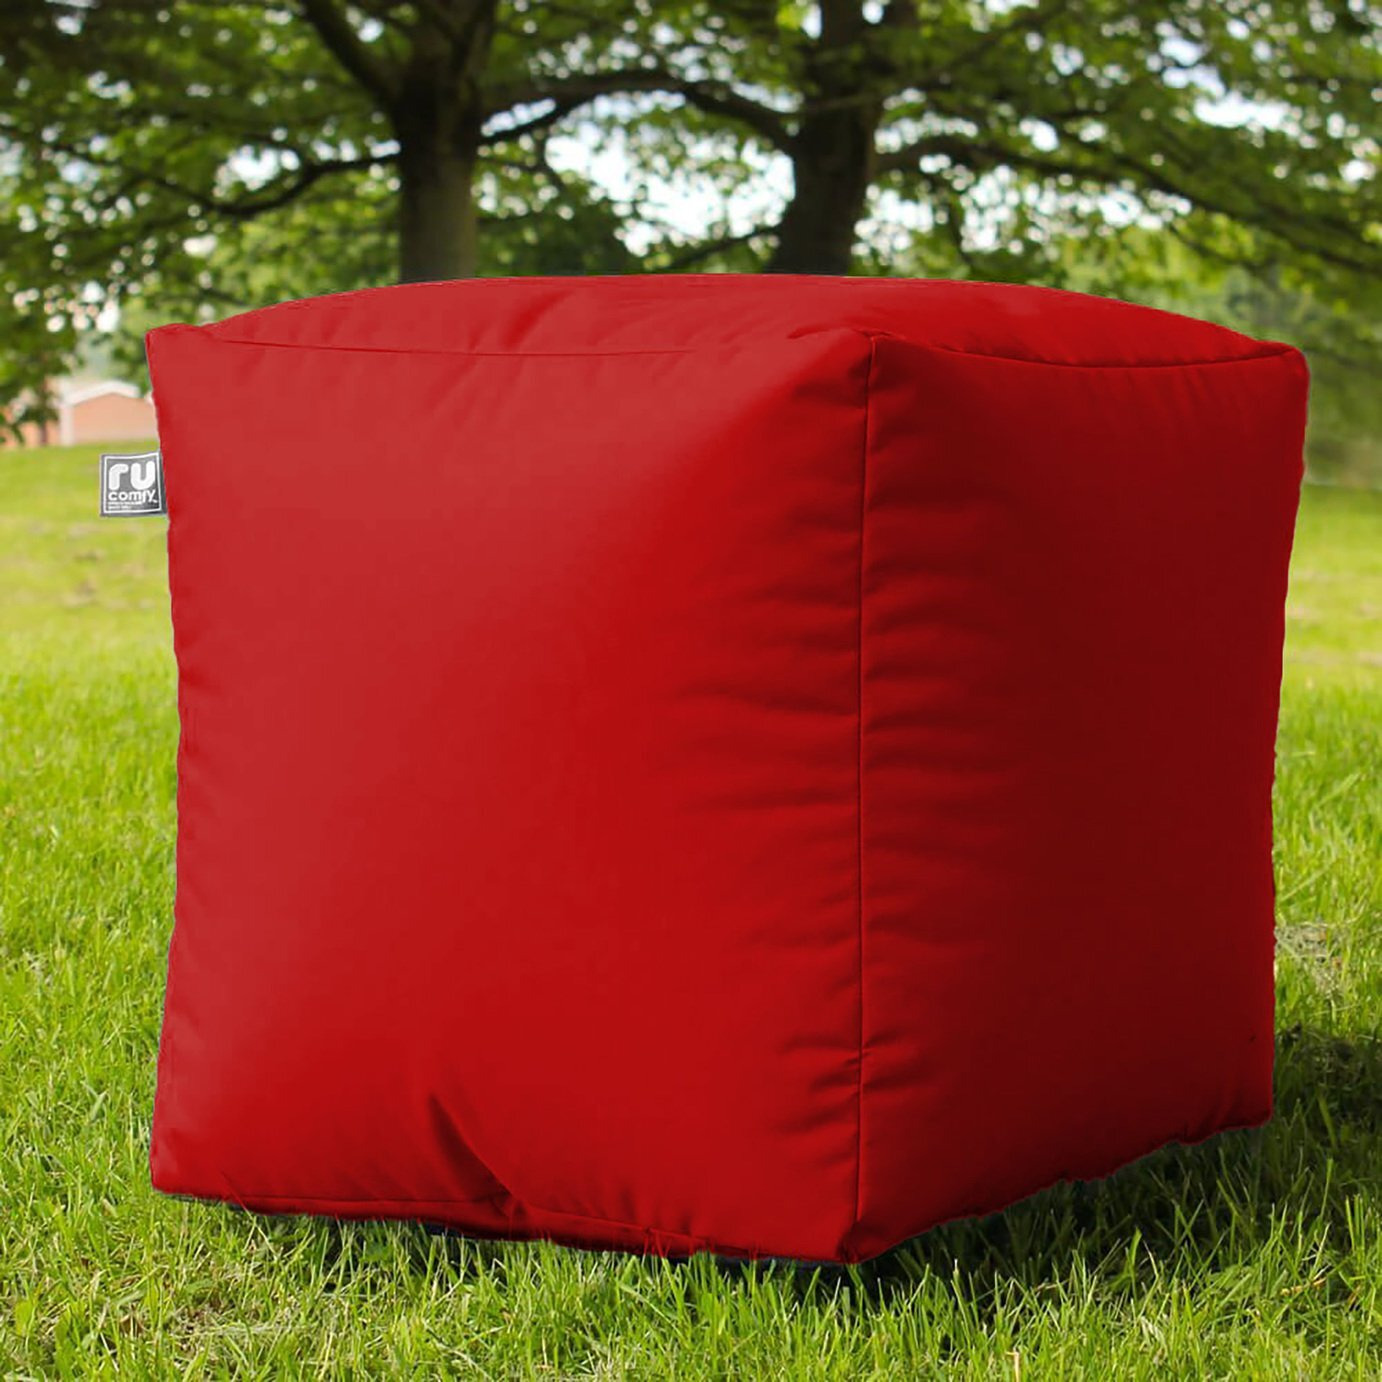 rucomfy Indoor Outdoor Cube Bean Bag - Red - image 1